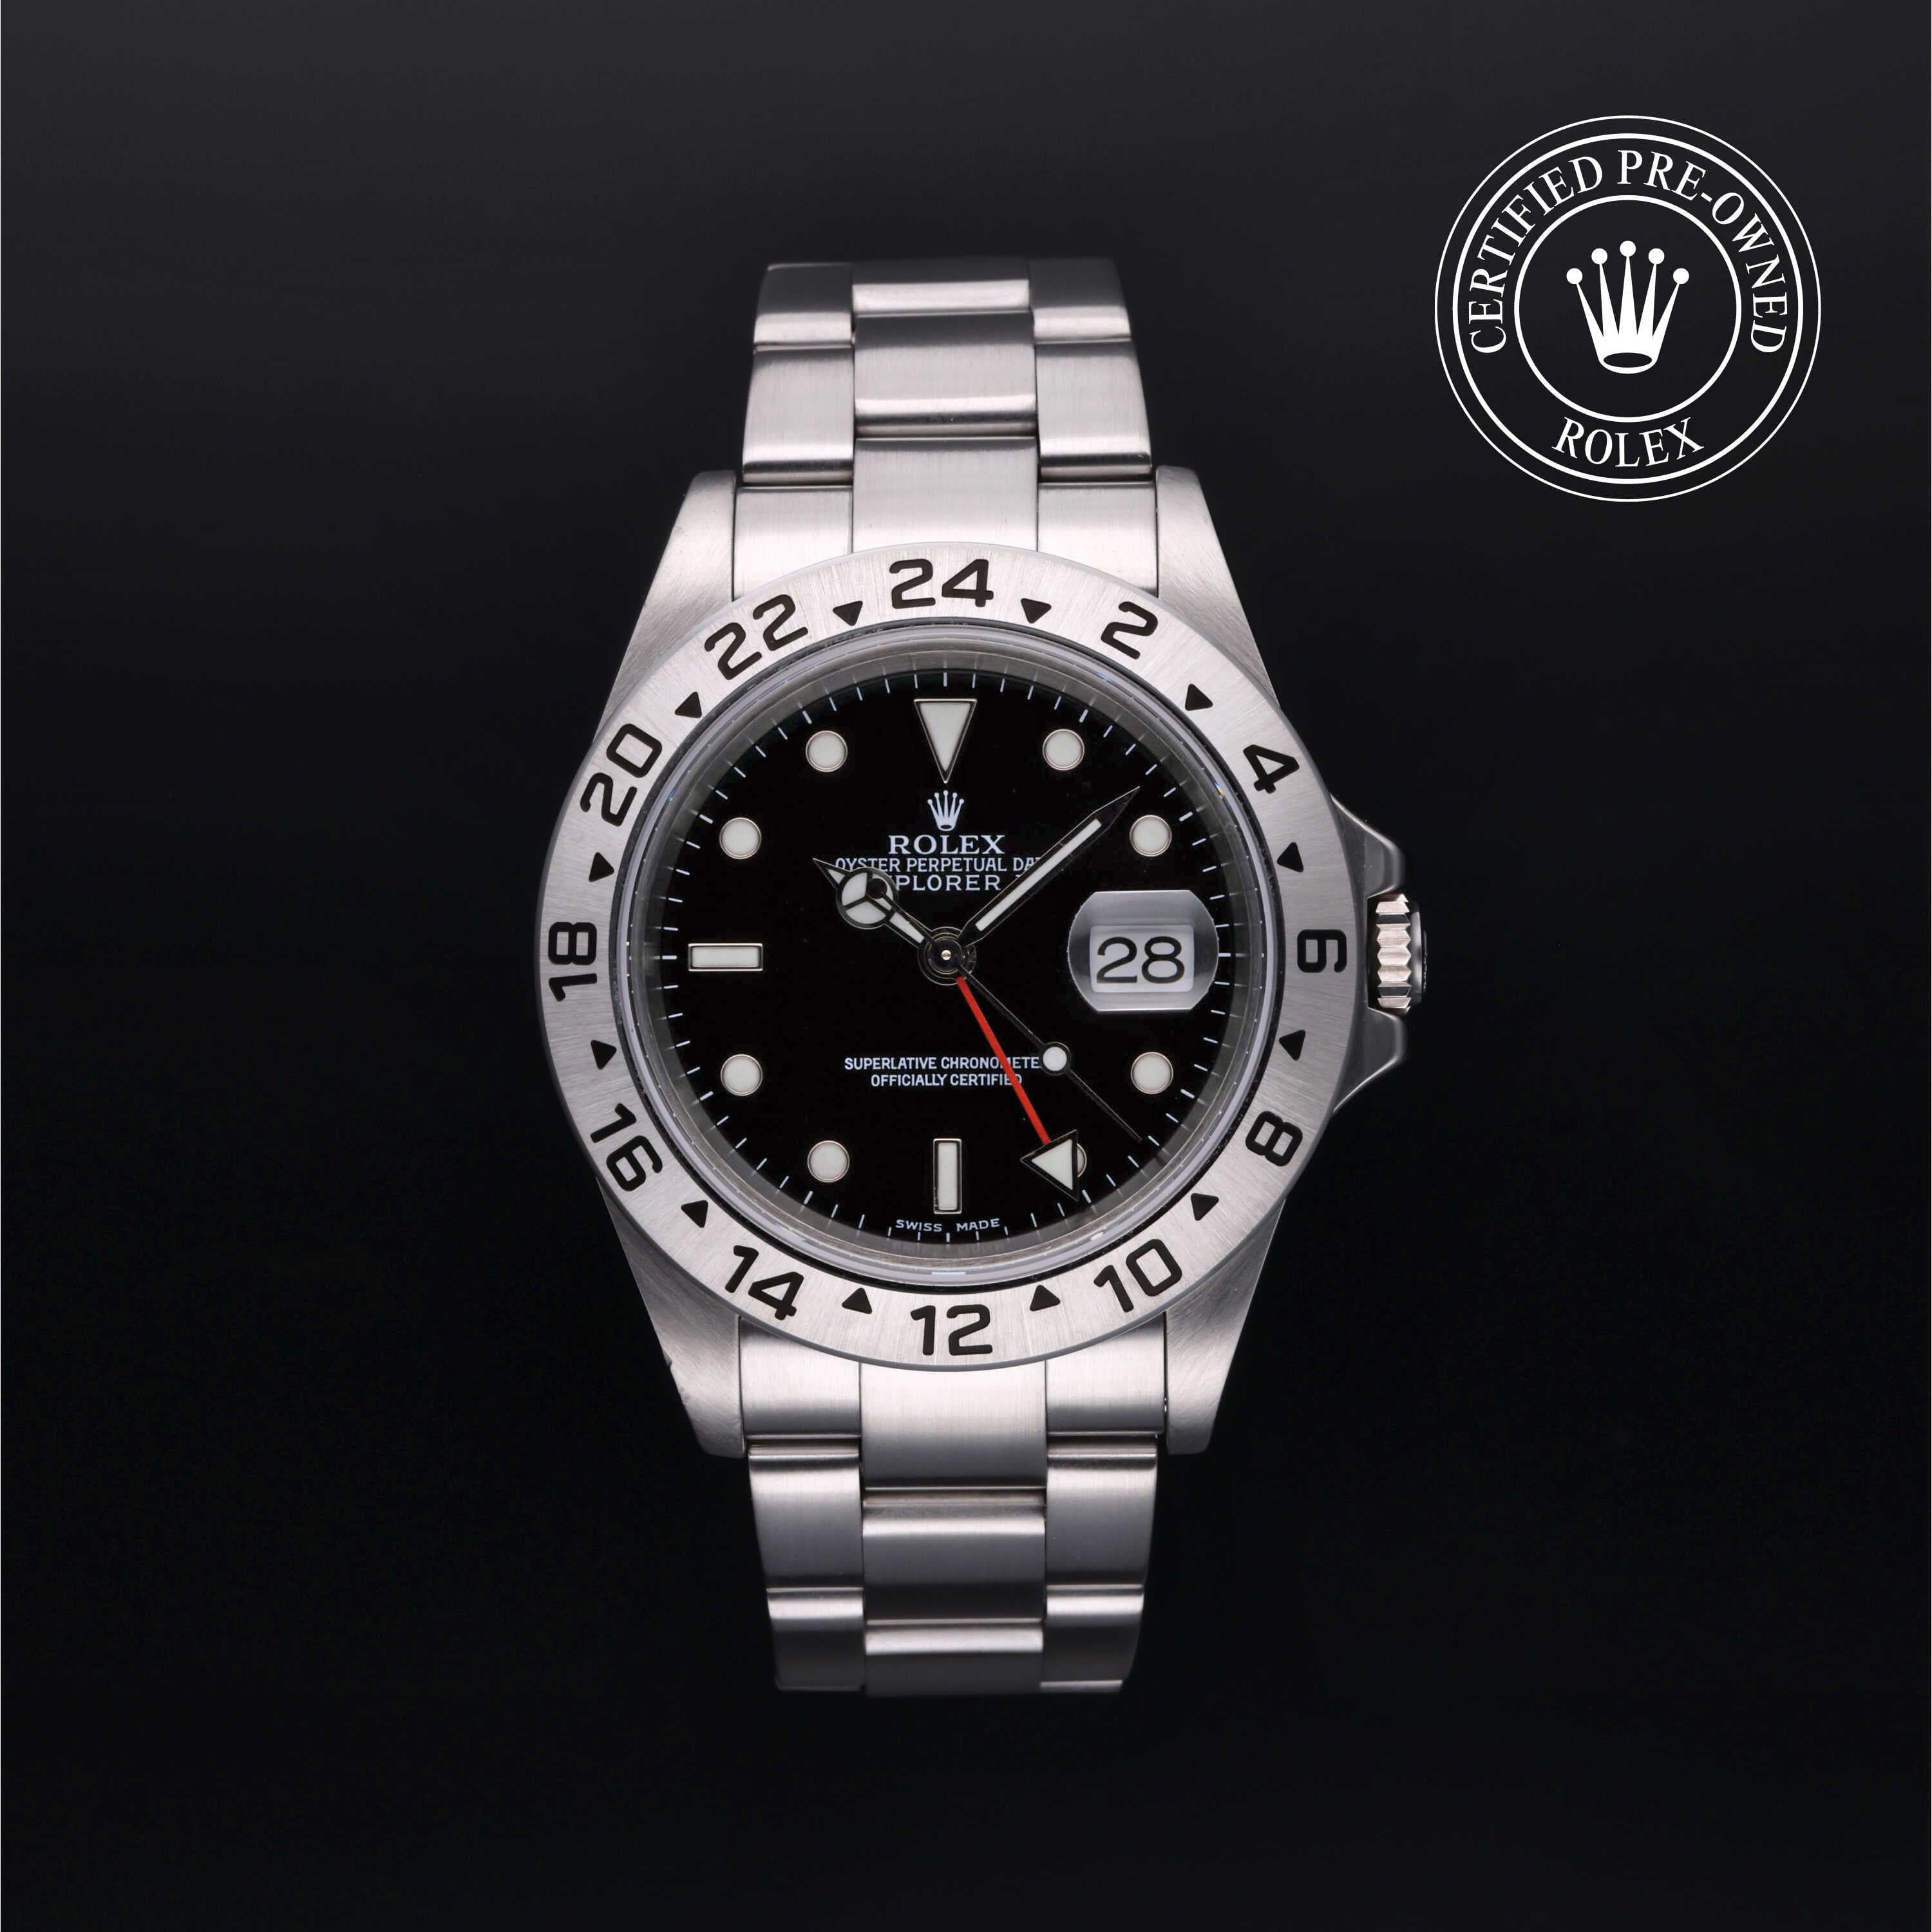 Rolex Certified Pre-Owned Explorer II in Oyster, 40 mm, Stainless Steel 16570 watch available at Long's Jewelers.